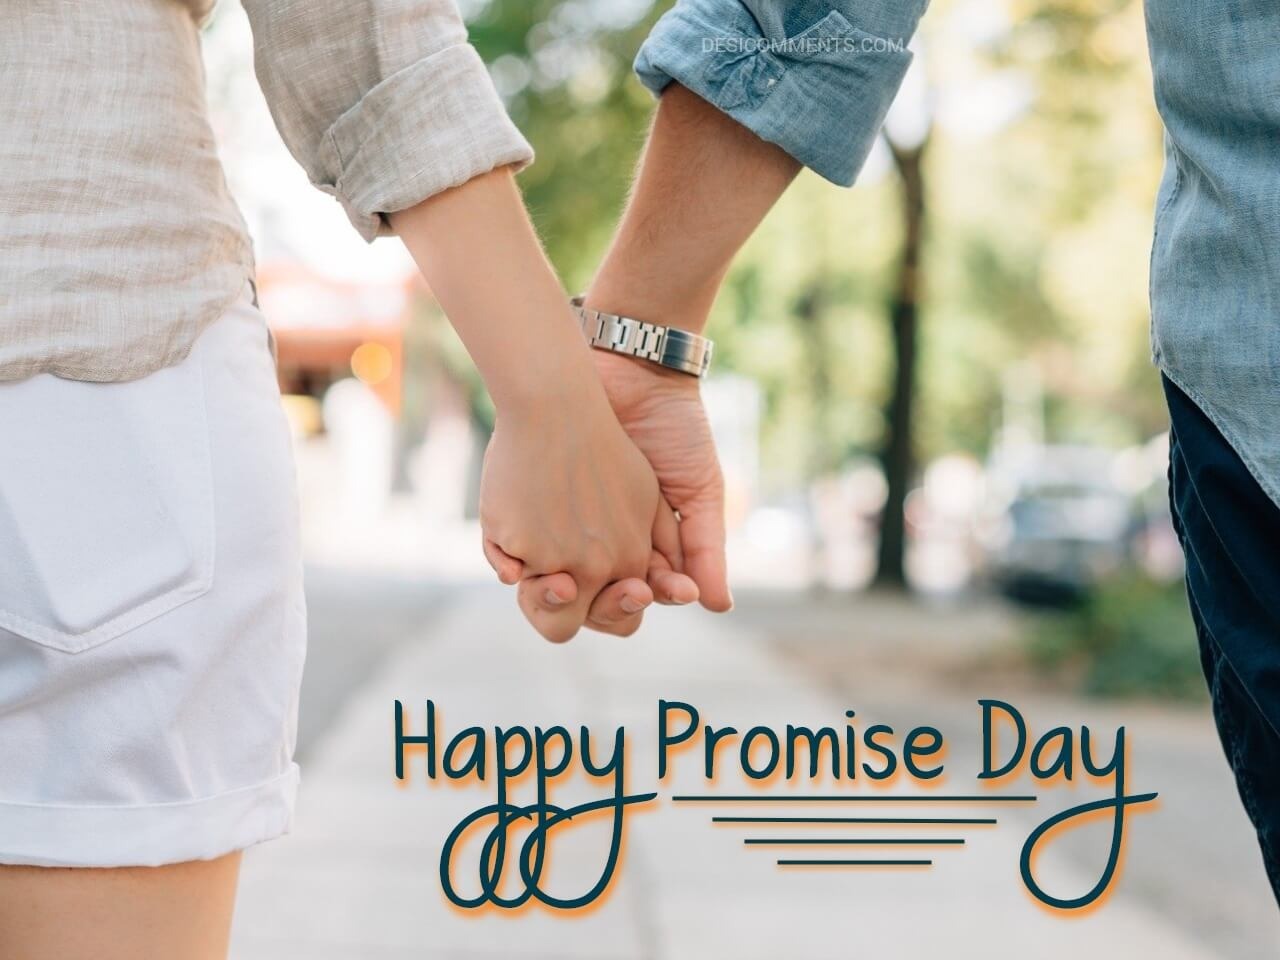 Happy Promise Day Images Hd Quotes Images Wishes